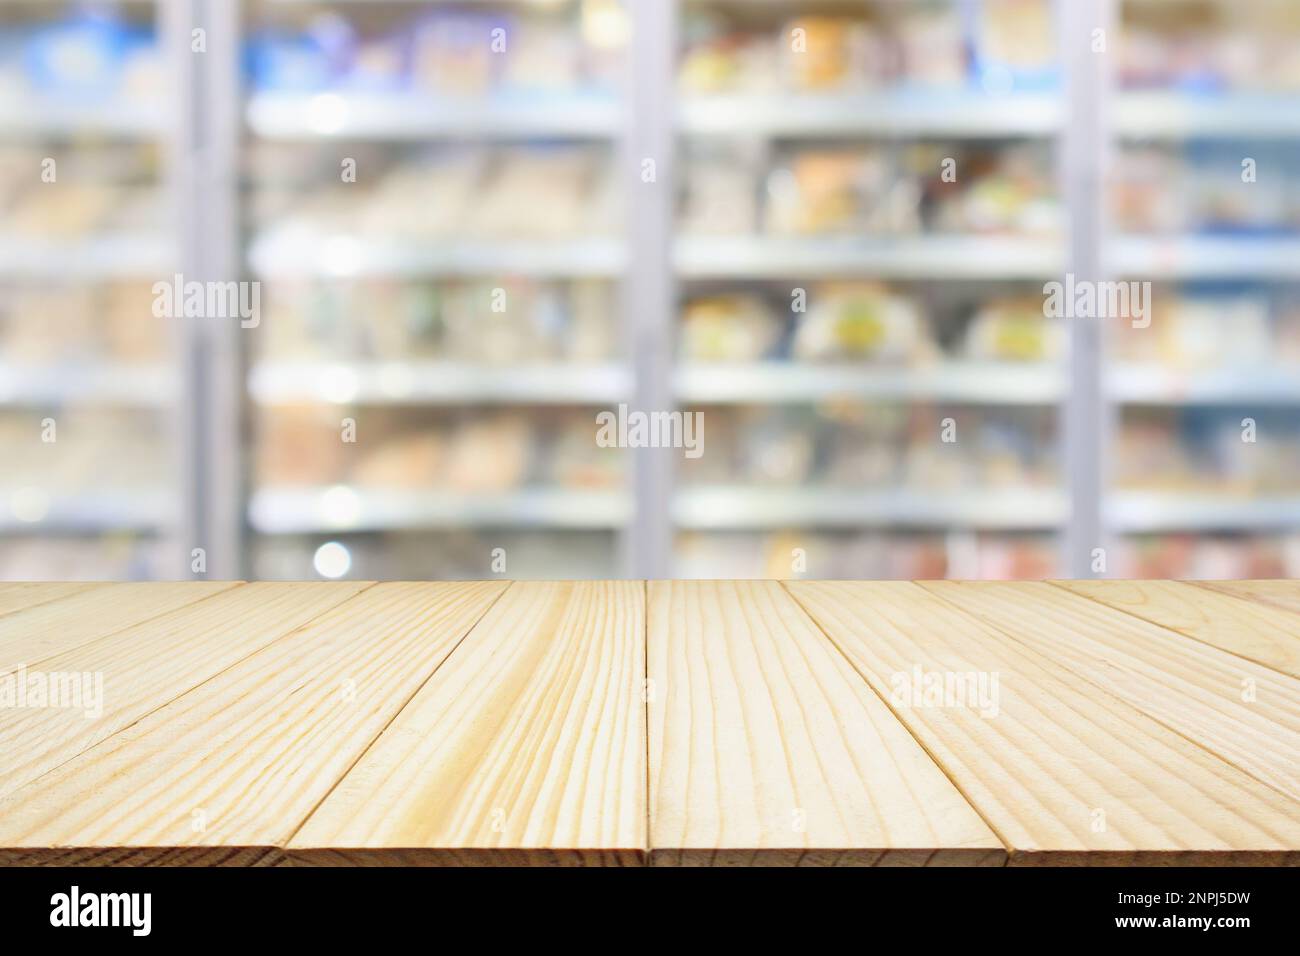 wood table with supermarket commercial refrigerators freezer showing frozen foods abstract blur background Stock Photo